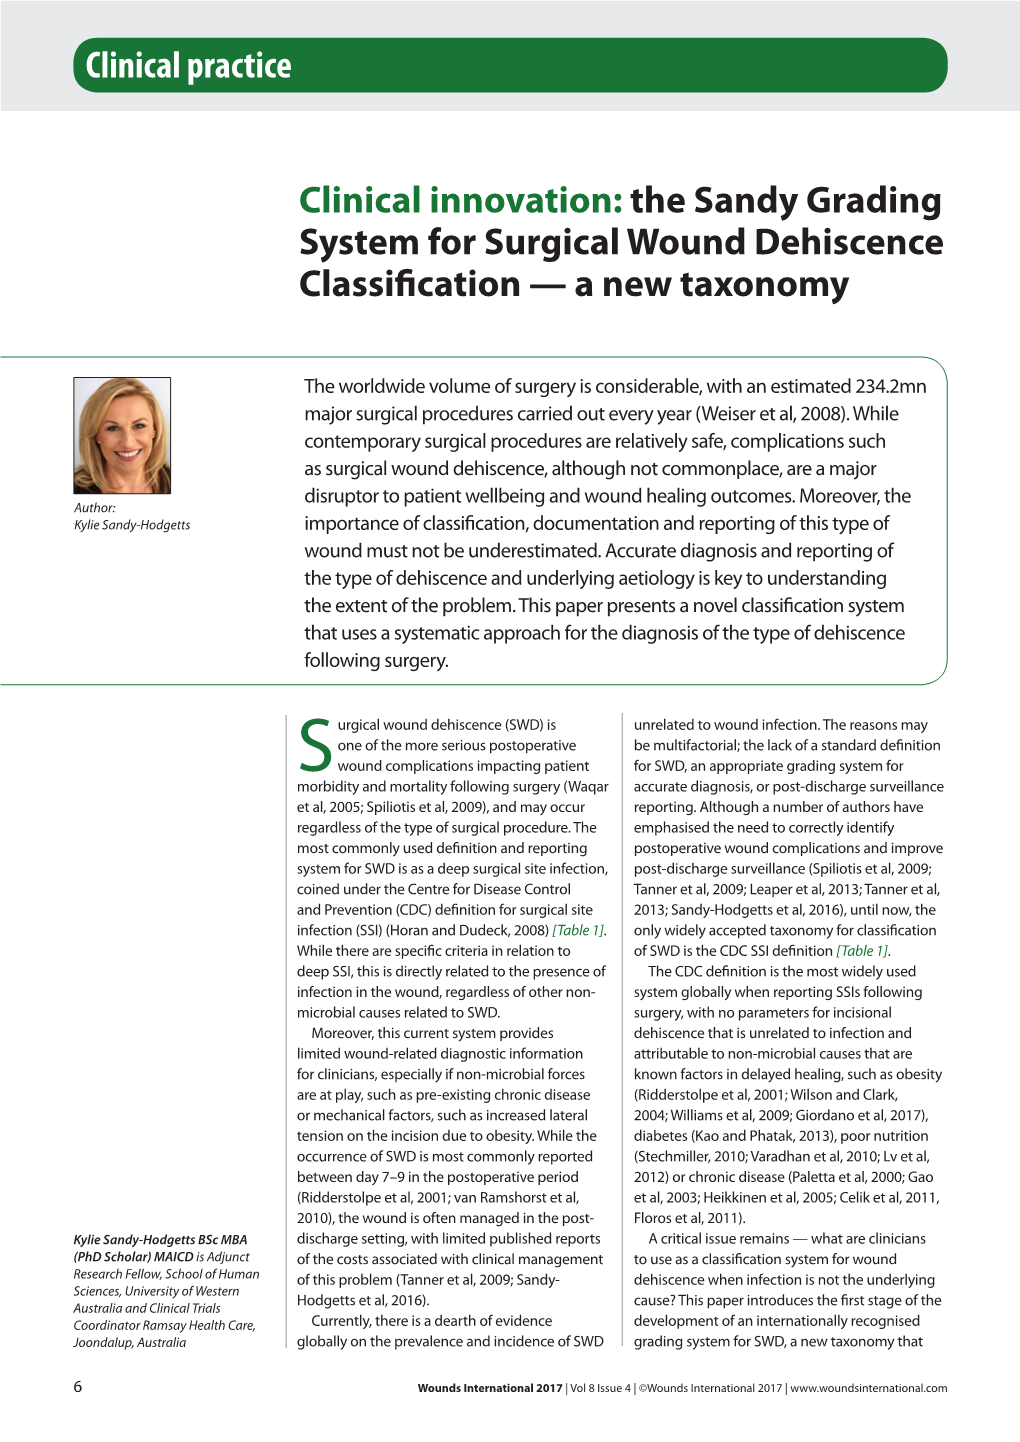 System for Surgical Wound Dehiscence Classification — a New Taxonomy